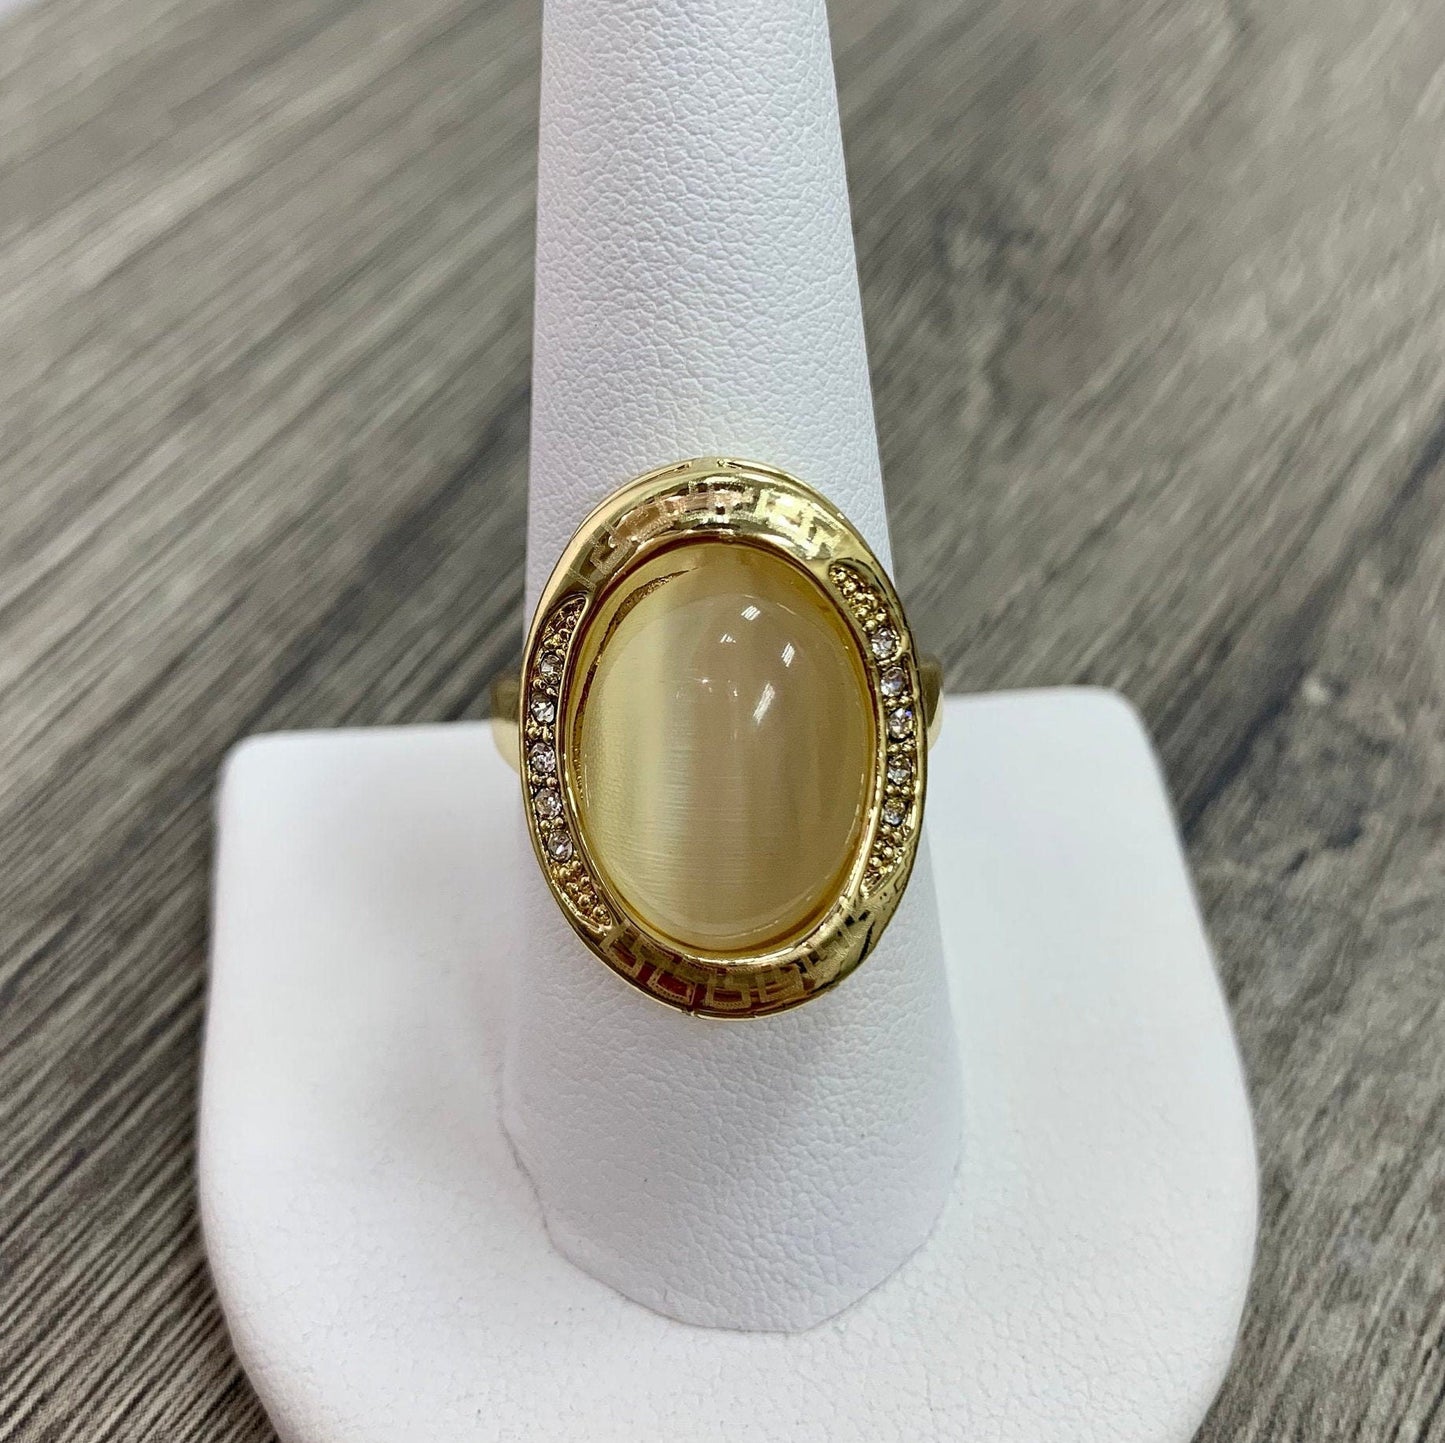 18k Gold Filled Semi Precious Oval Ring Featuring Simulated Quartz Stone And Quality Cubic Zirconia Wholesale Jewelry Supplies